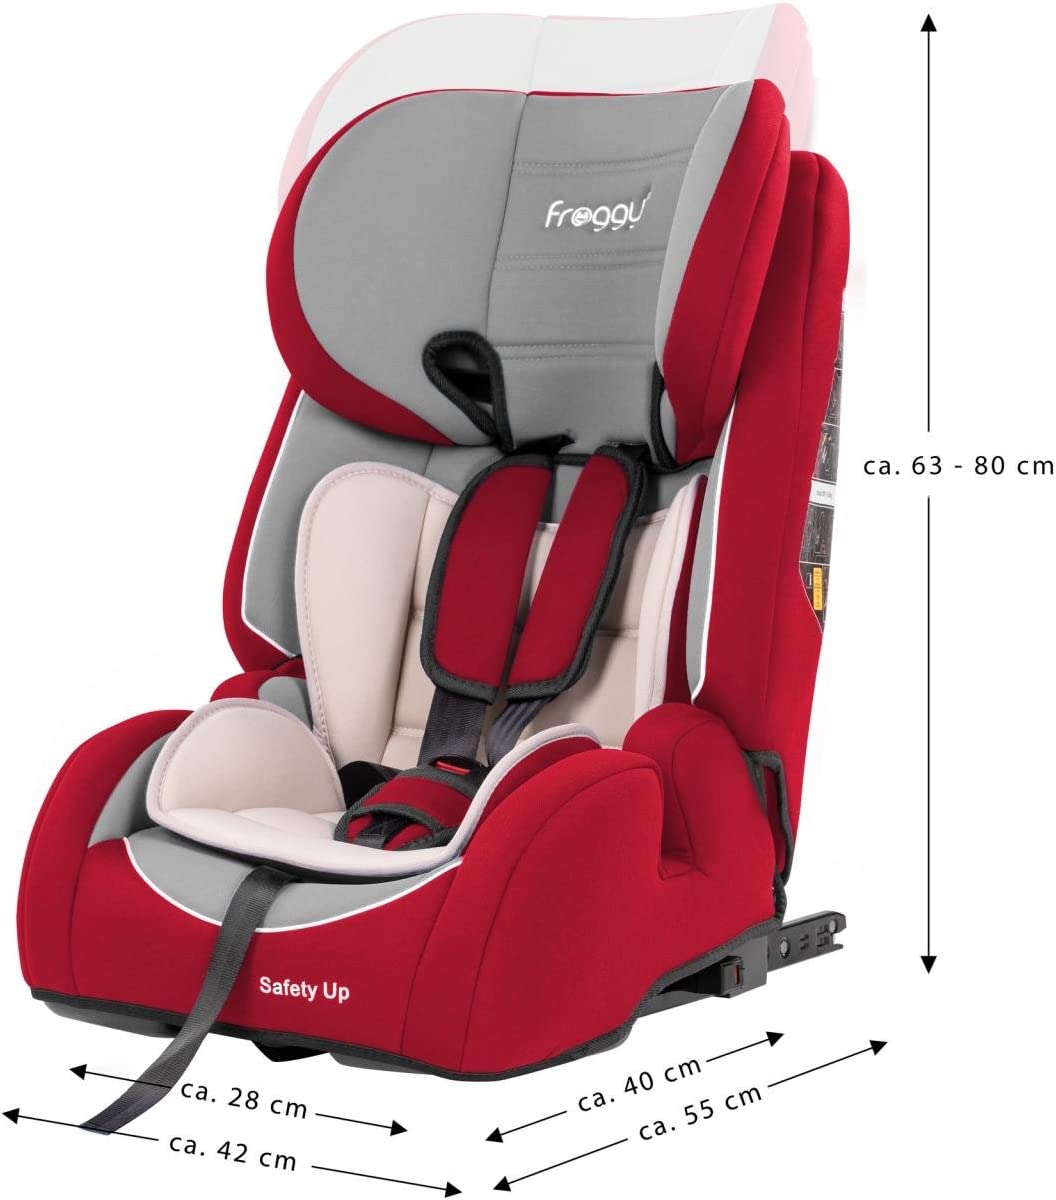 Froggy® Safety Up Children’s Car Seat with ISOFIX Group I/II/III (9-36 kg) + ECE R44/04 Safety Standard + 5-Point Safety Belt, Adjustable Headrest, red